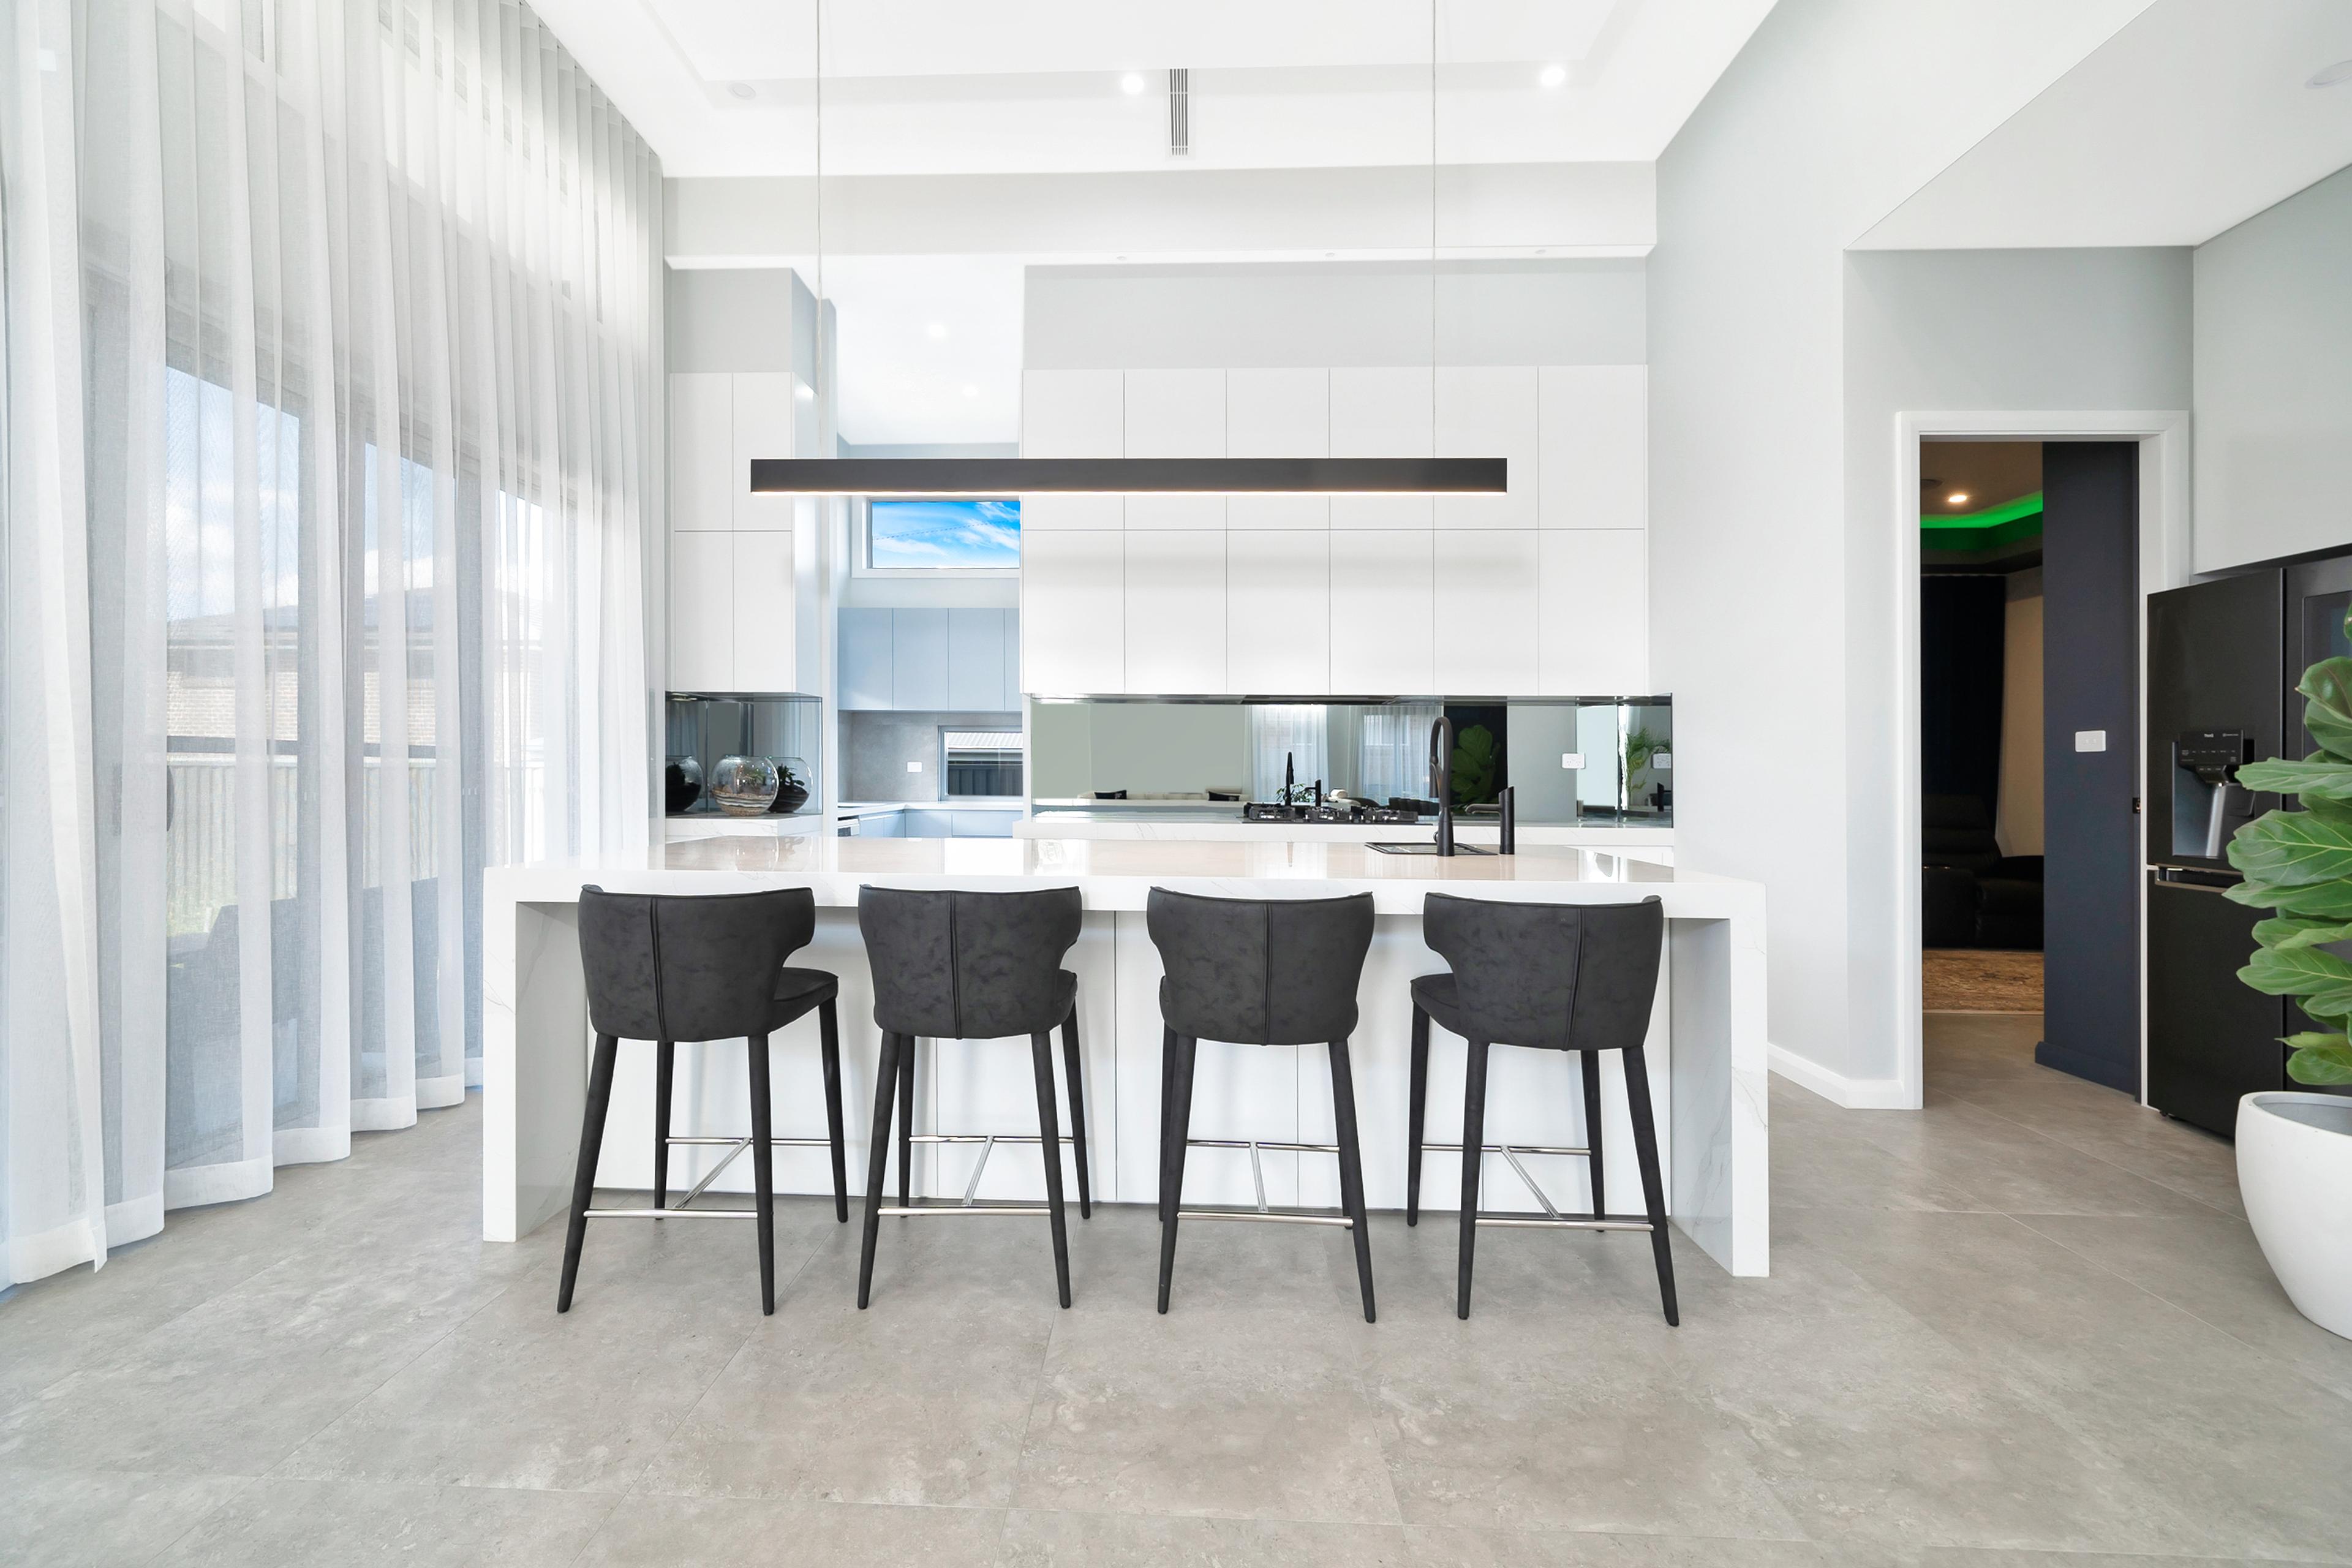 Dezire Homes build, modern kitchen space in all white with black accents